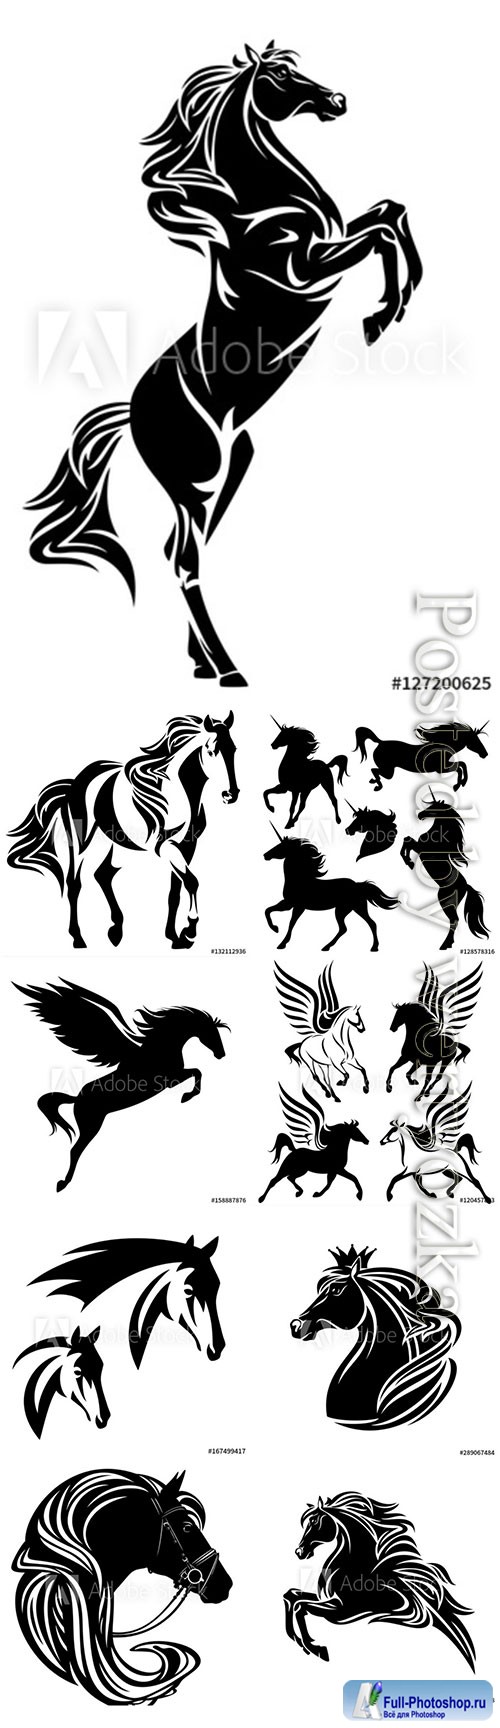 Horses, unicorns and pegasuses in vector